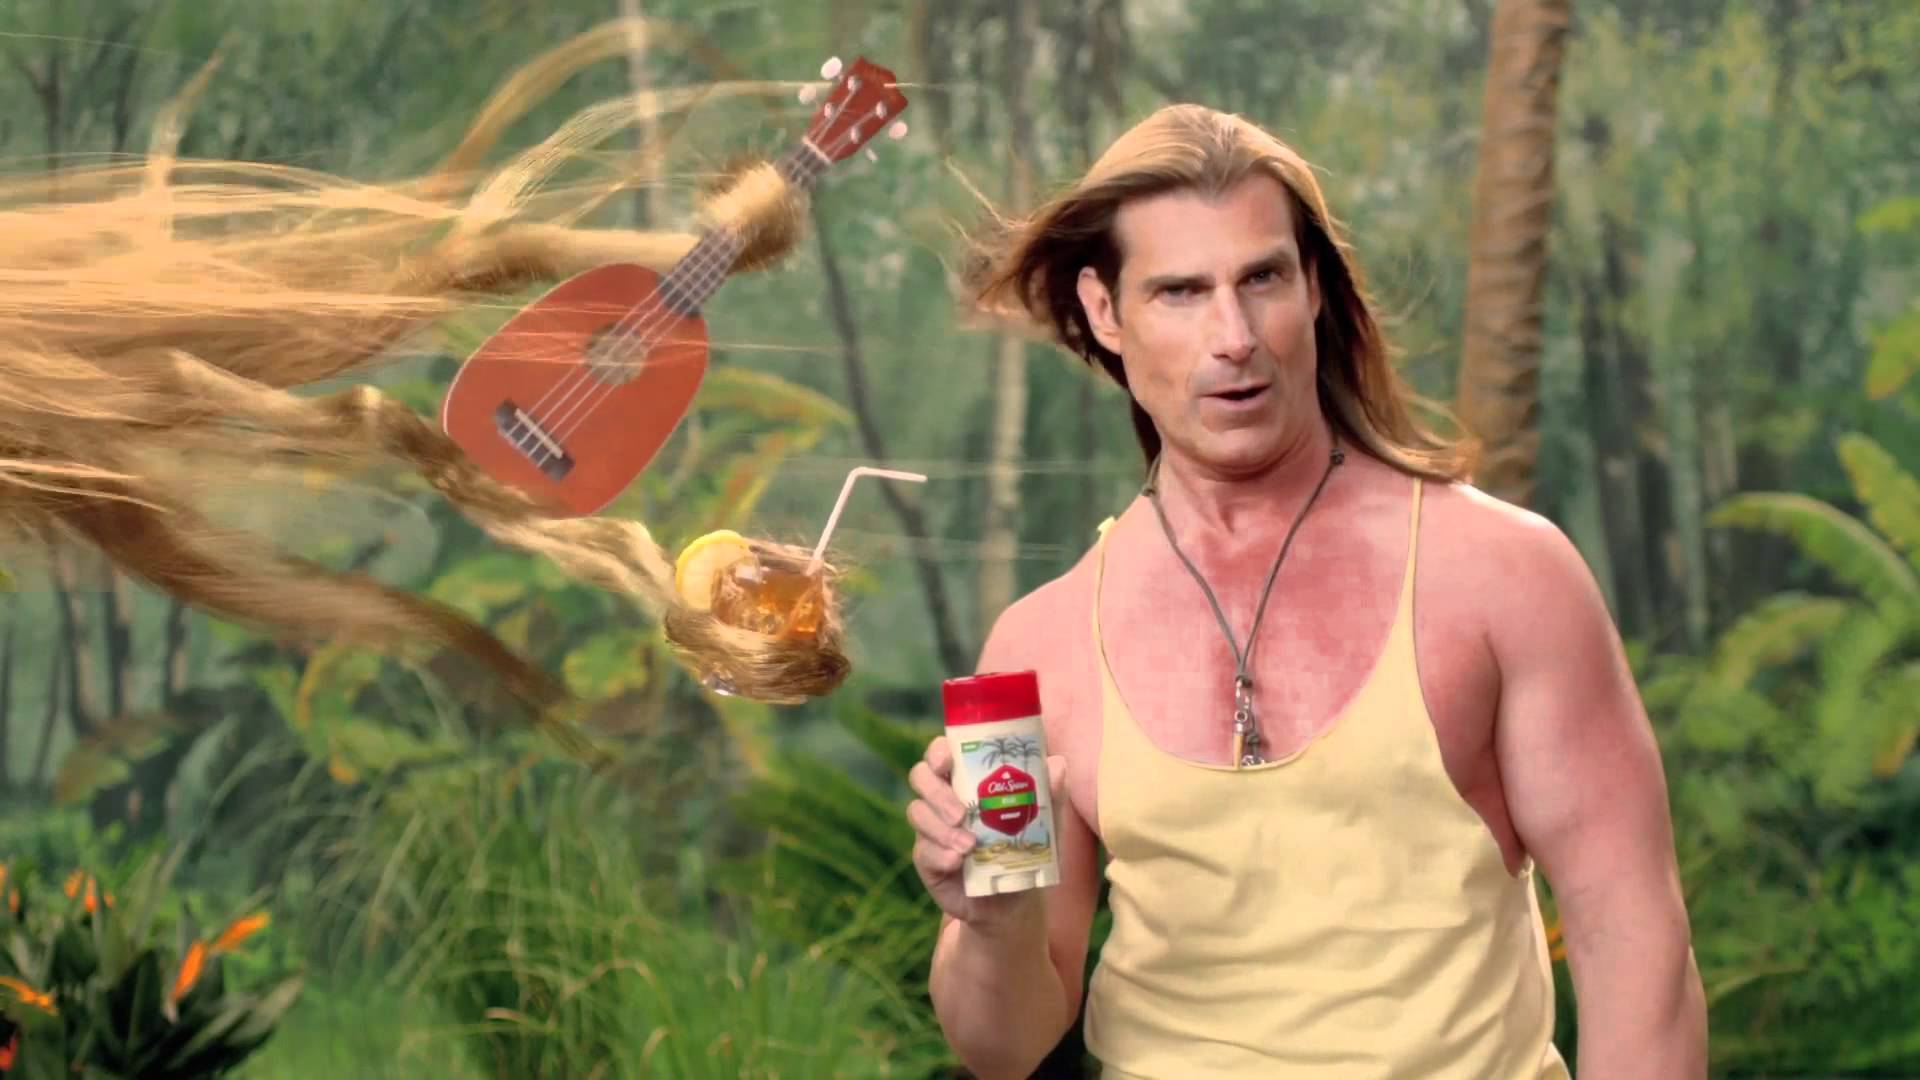 Hair (featuring NEW Old Spice Guy Fabio)! - YouTube